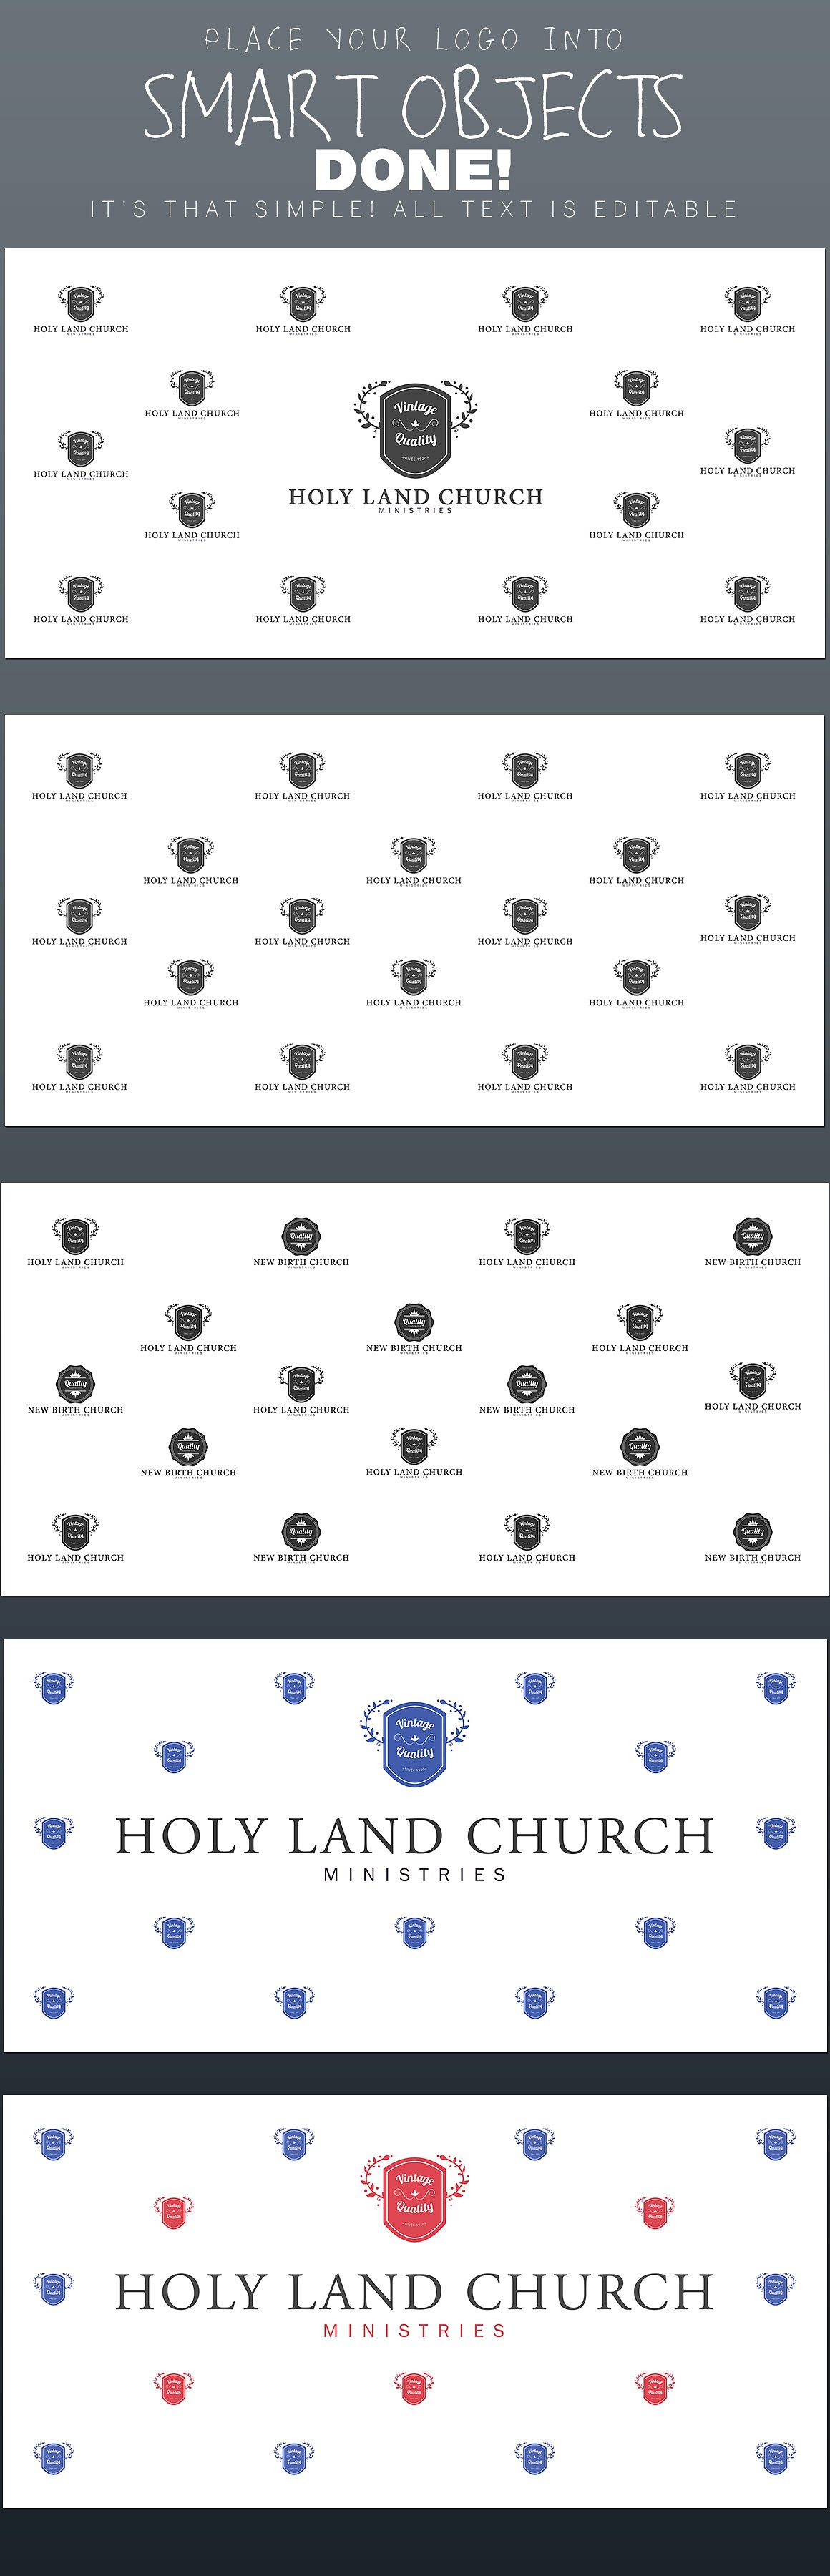 Download Step And Repeat Backdrop Photoshop Template